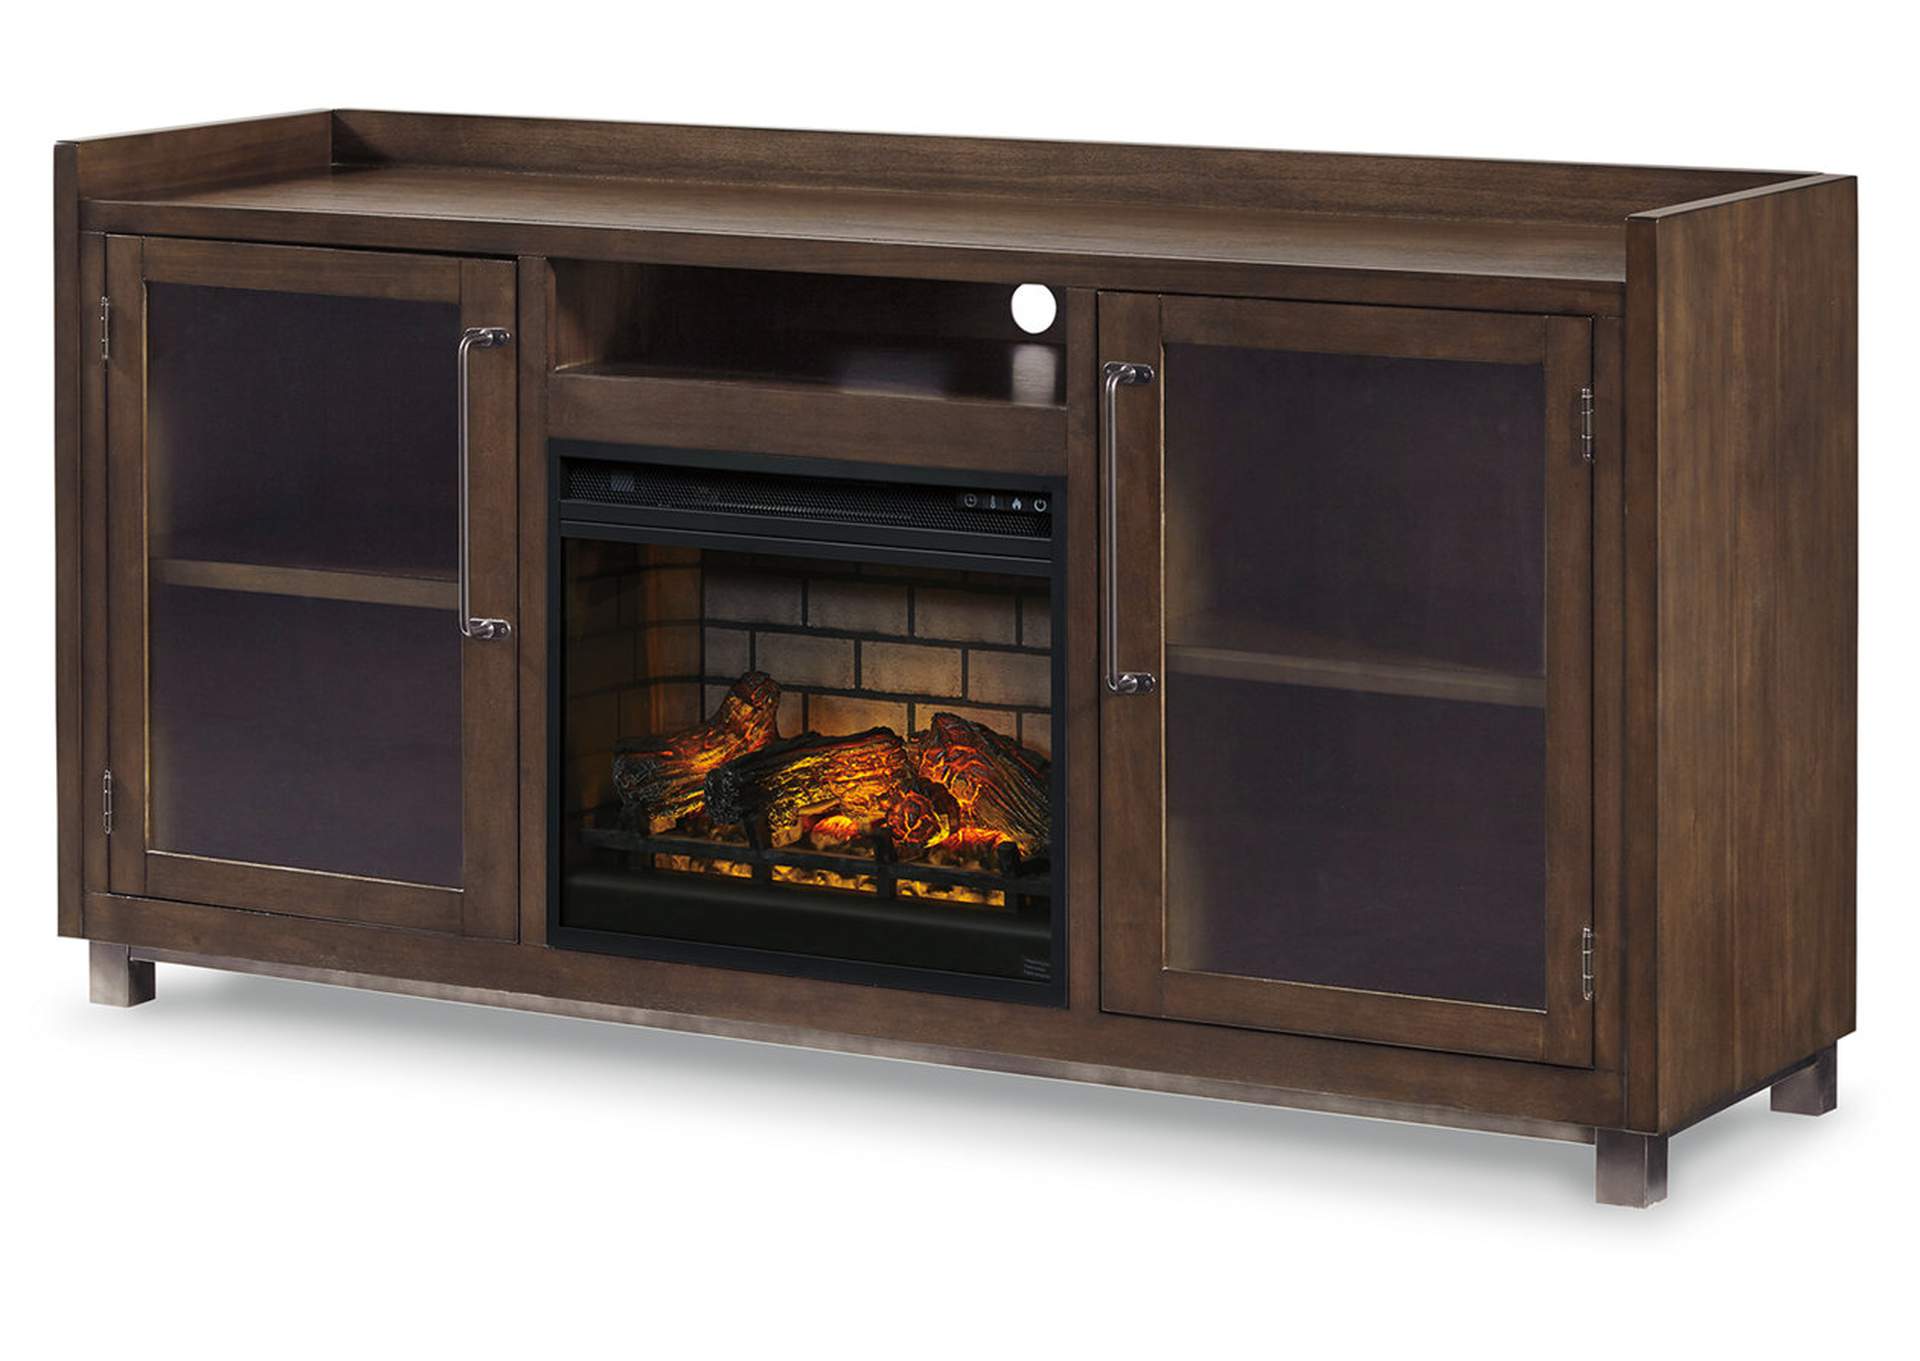 Starmore 3-Piece Wall Unit with Electric Fireplace,Signature Design By Ashley